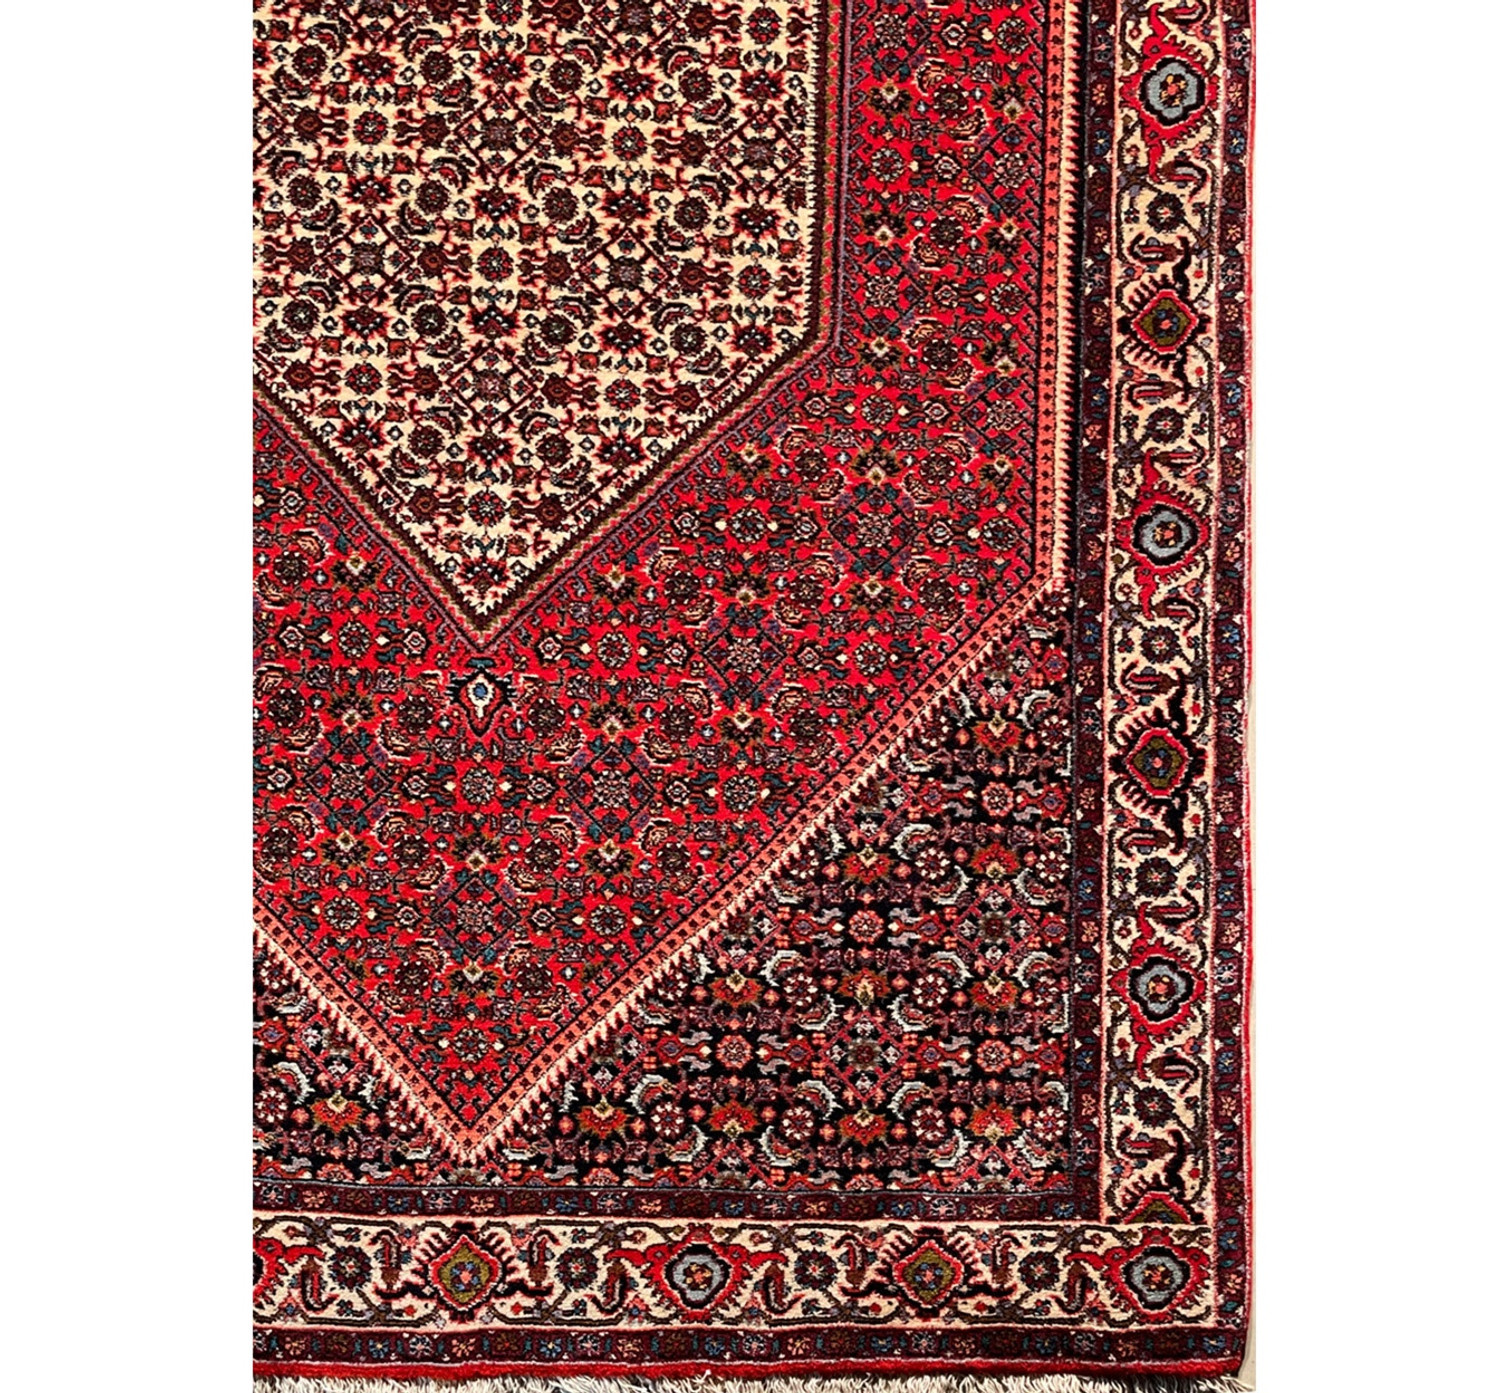 Detailed view of the Persian Bijar rug's border and fringe, showcasing the fine patterns and color variations.